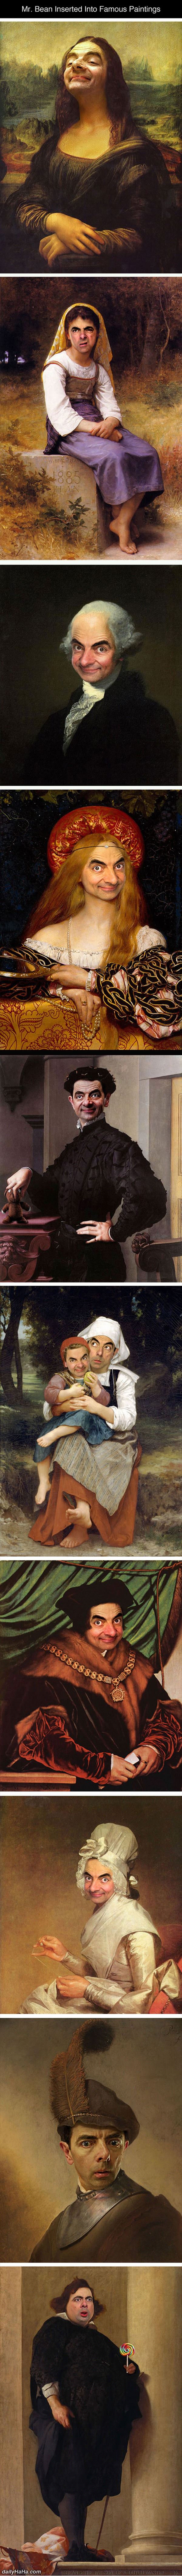 my bean in famous paintings funny picture